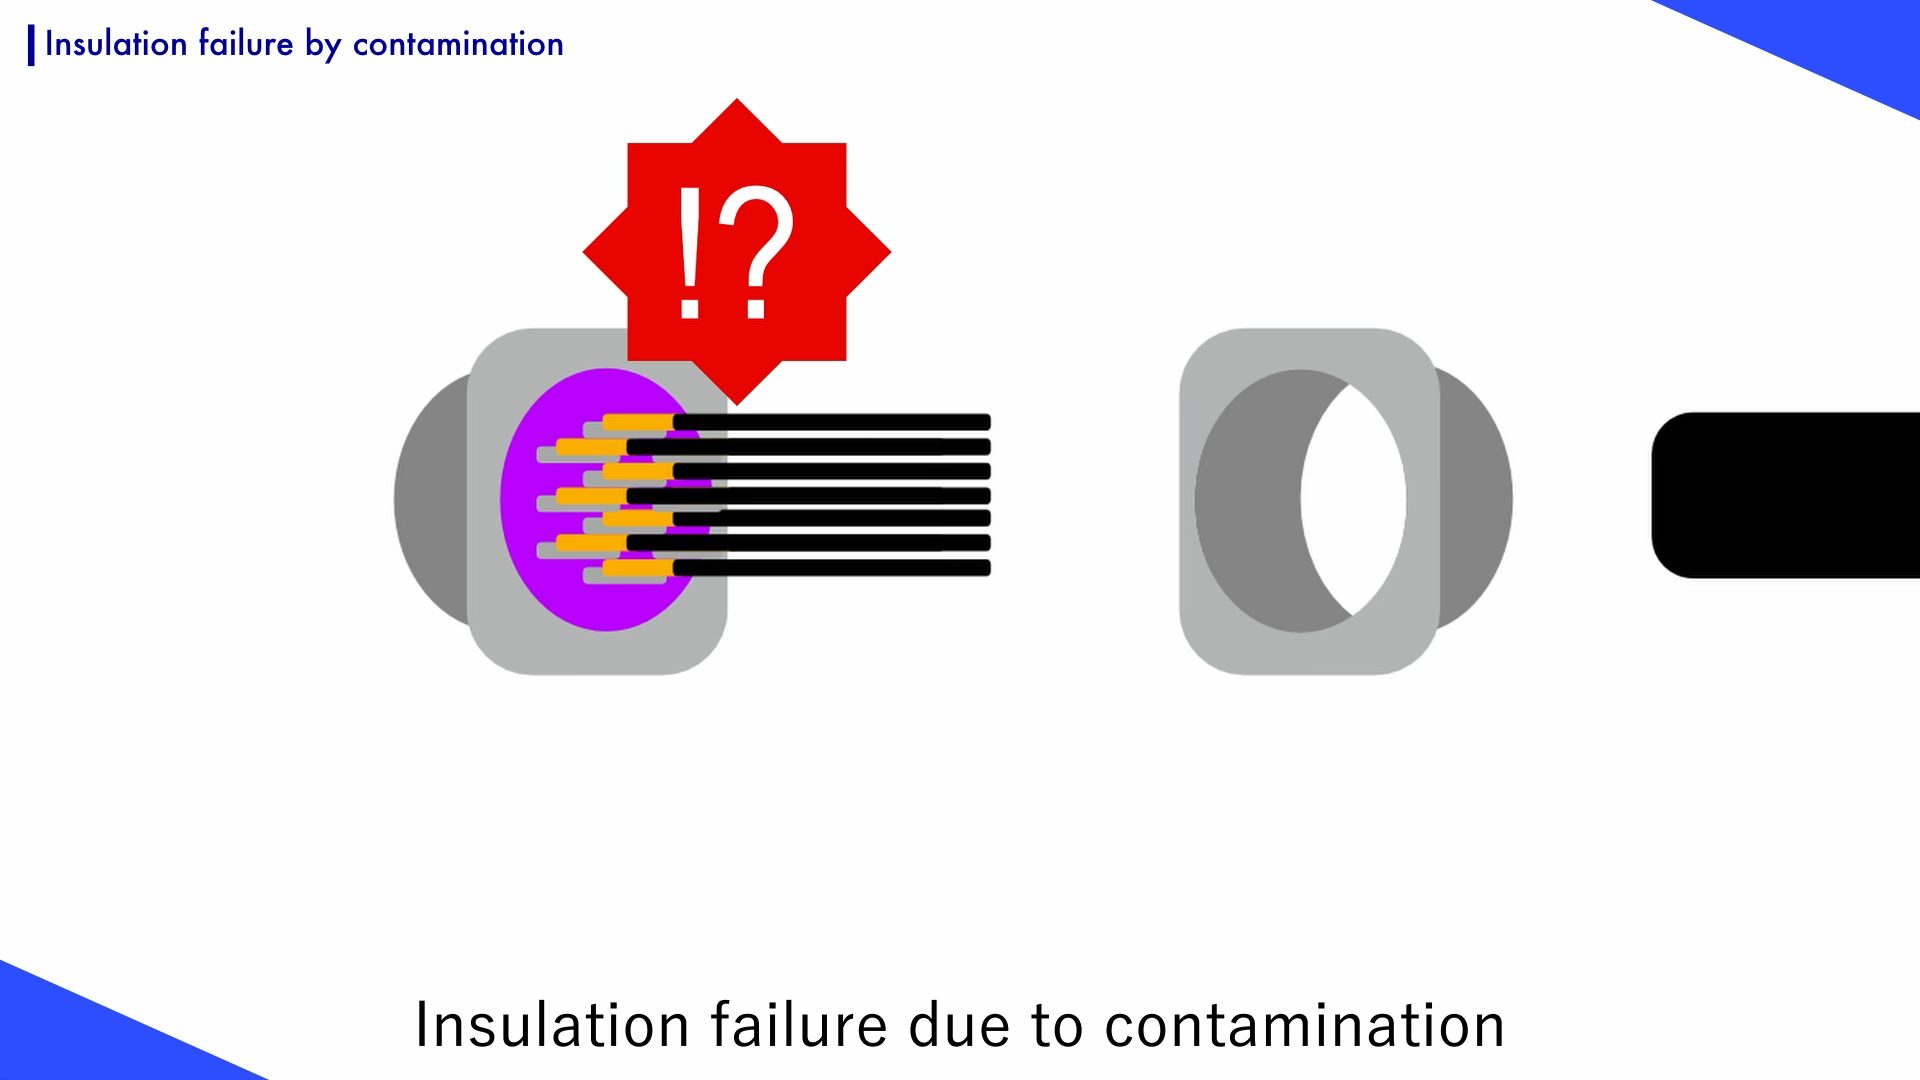 Contamination inside the connector causes insulation resistance failure